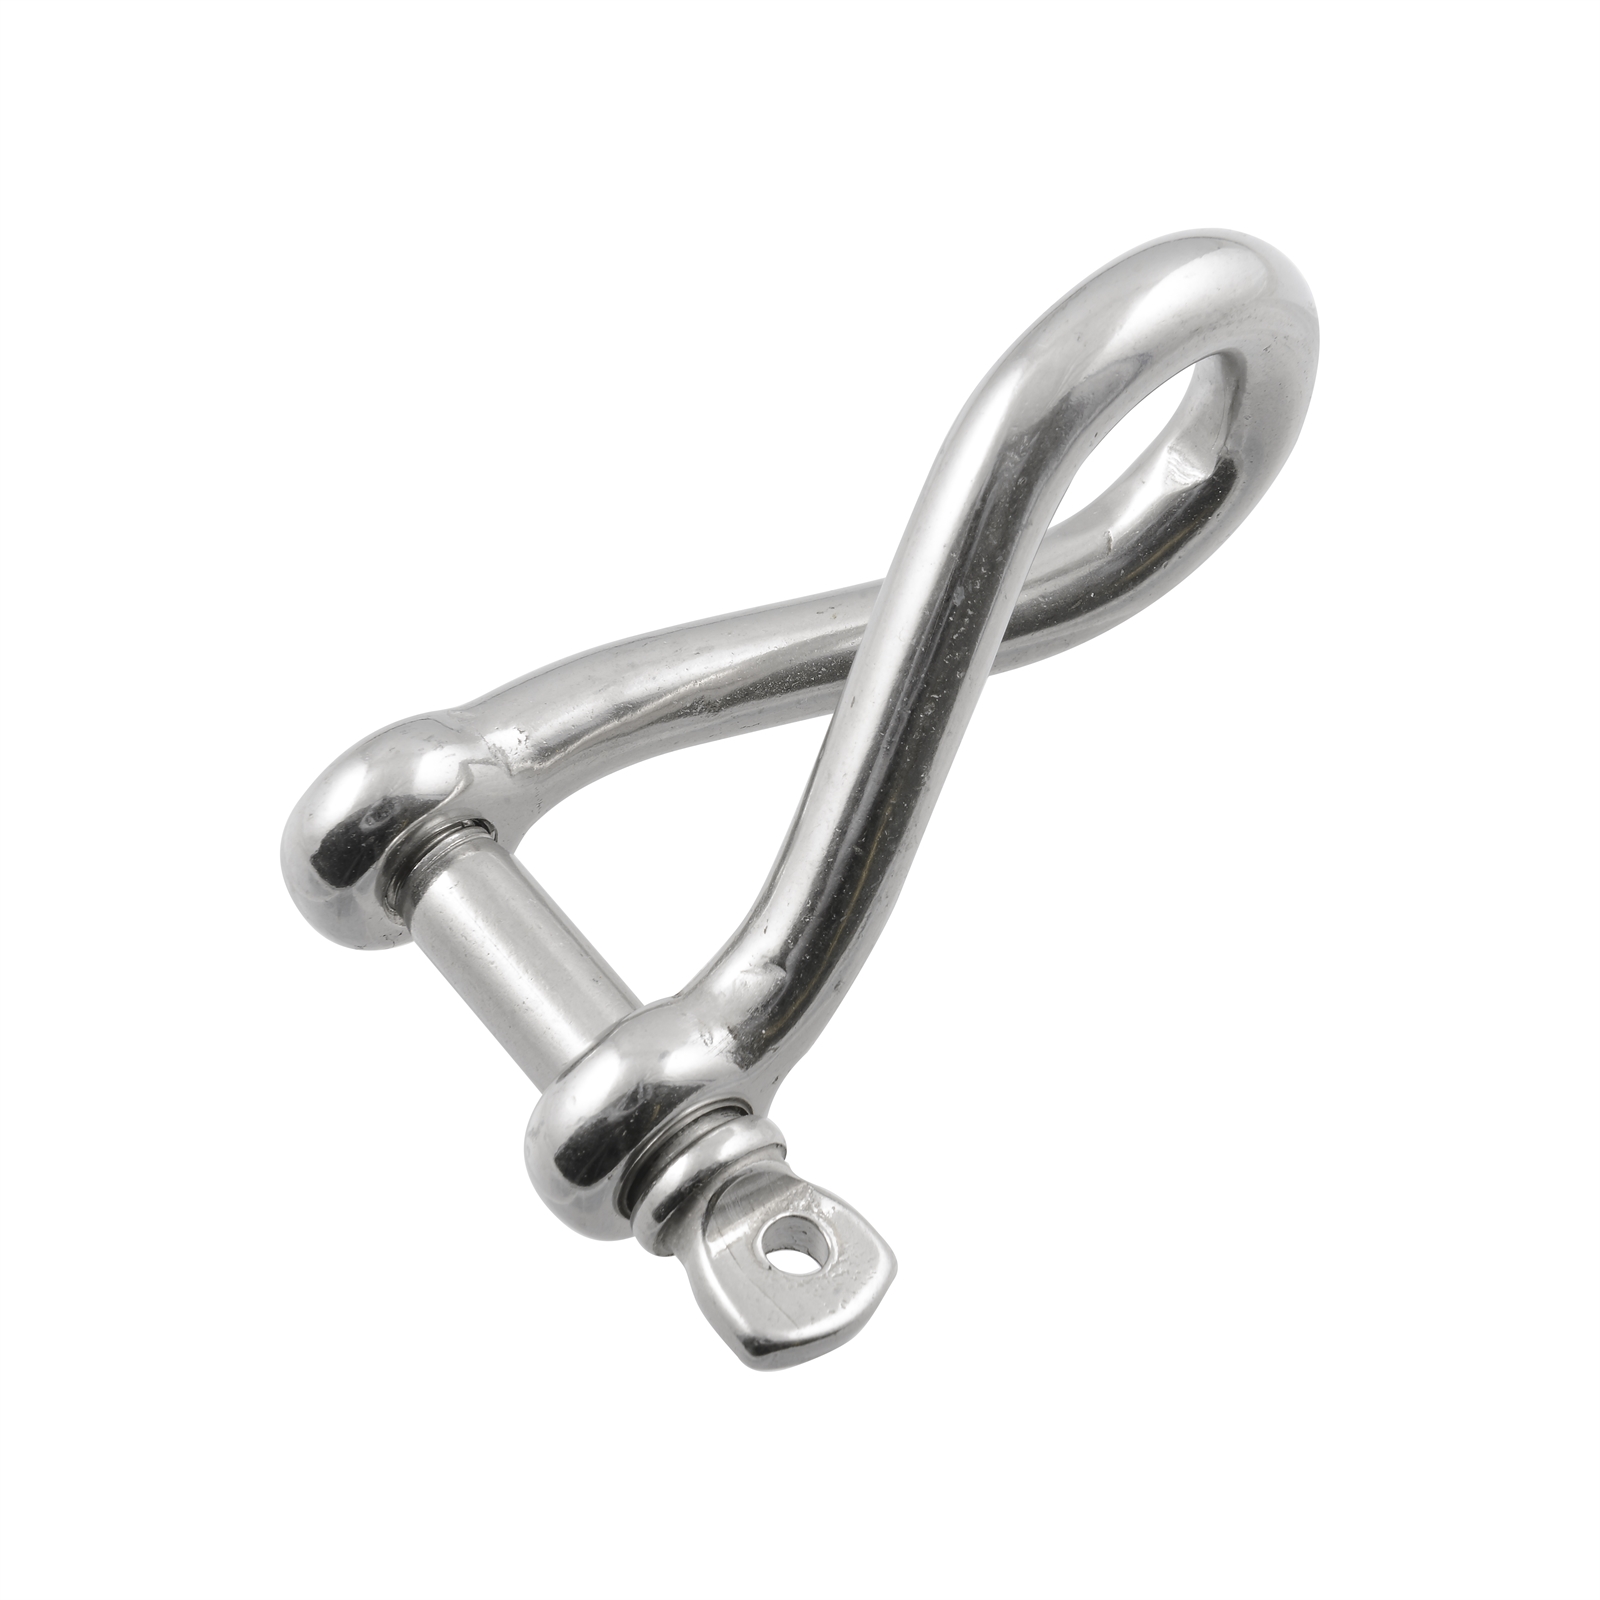 Zenith 8mm Stainless Steel Twist Shackle - 1 Pack | Bunnings Warehouse